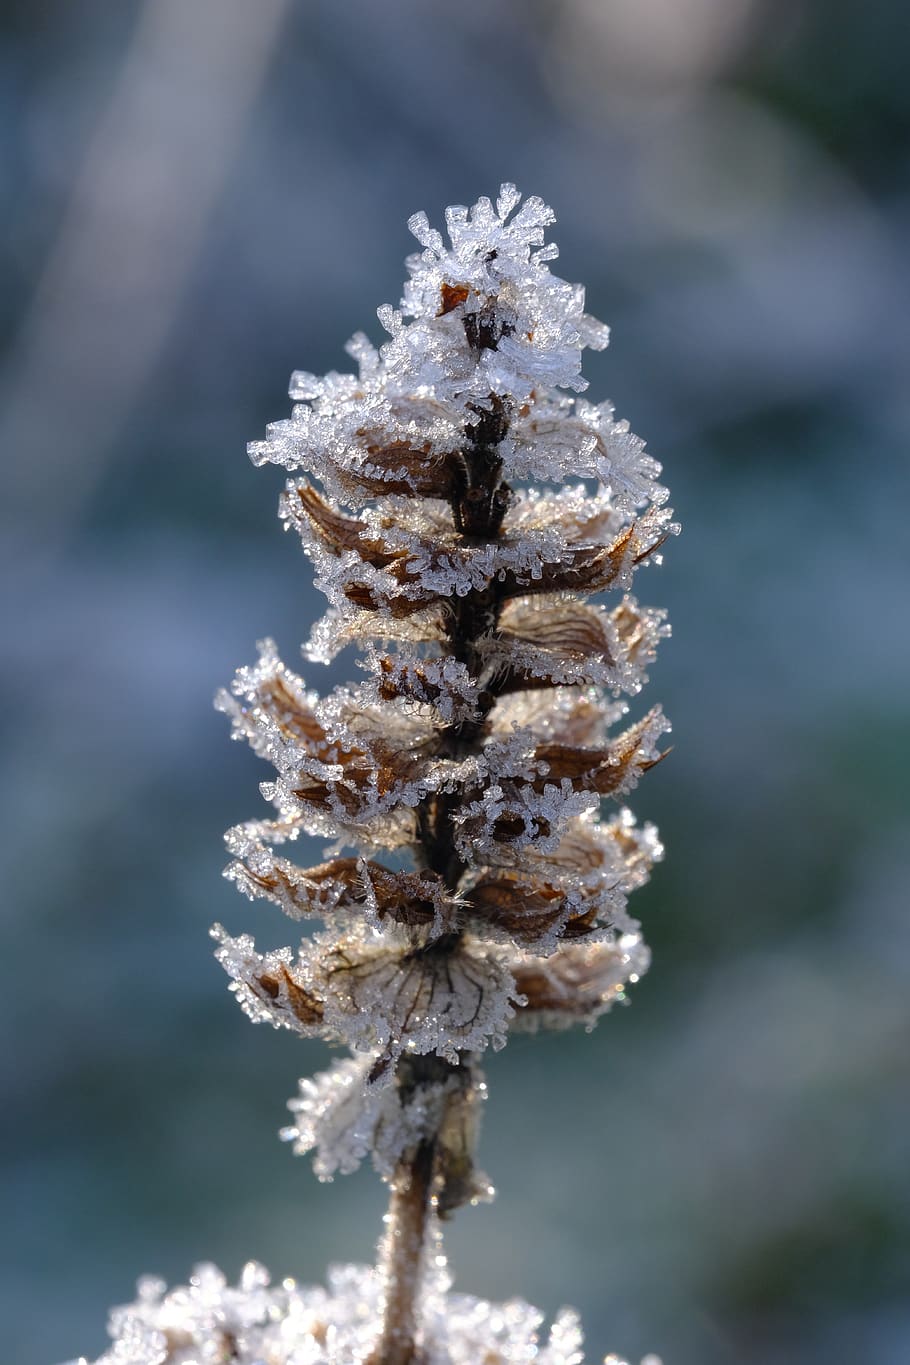 crystals, eiskristalle, winter, frost, cold, hardest, frozen, hoarfrost, icy, wintry